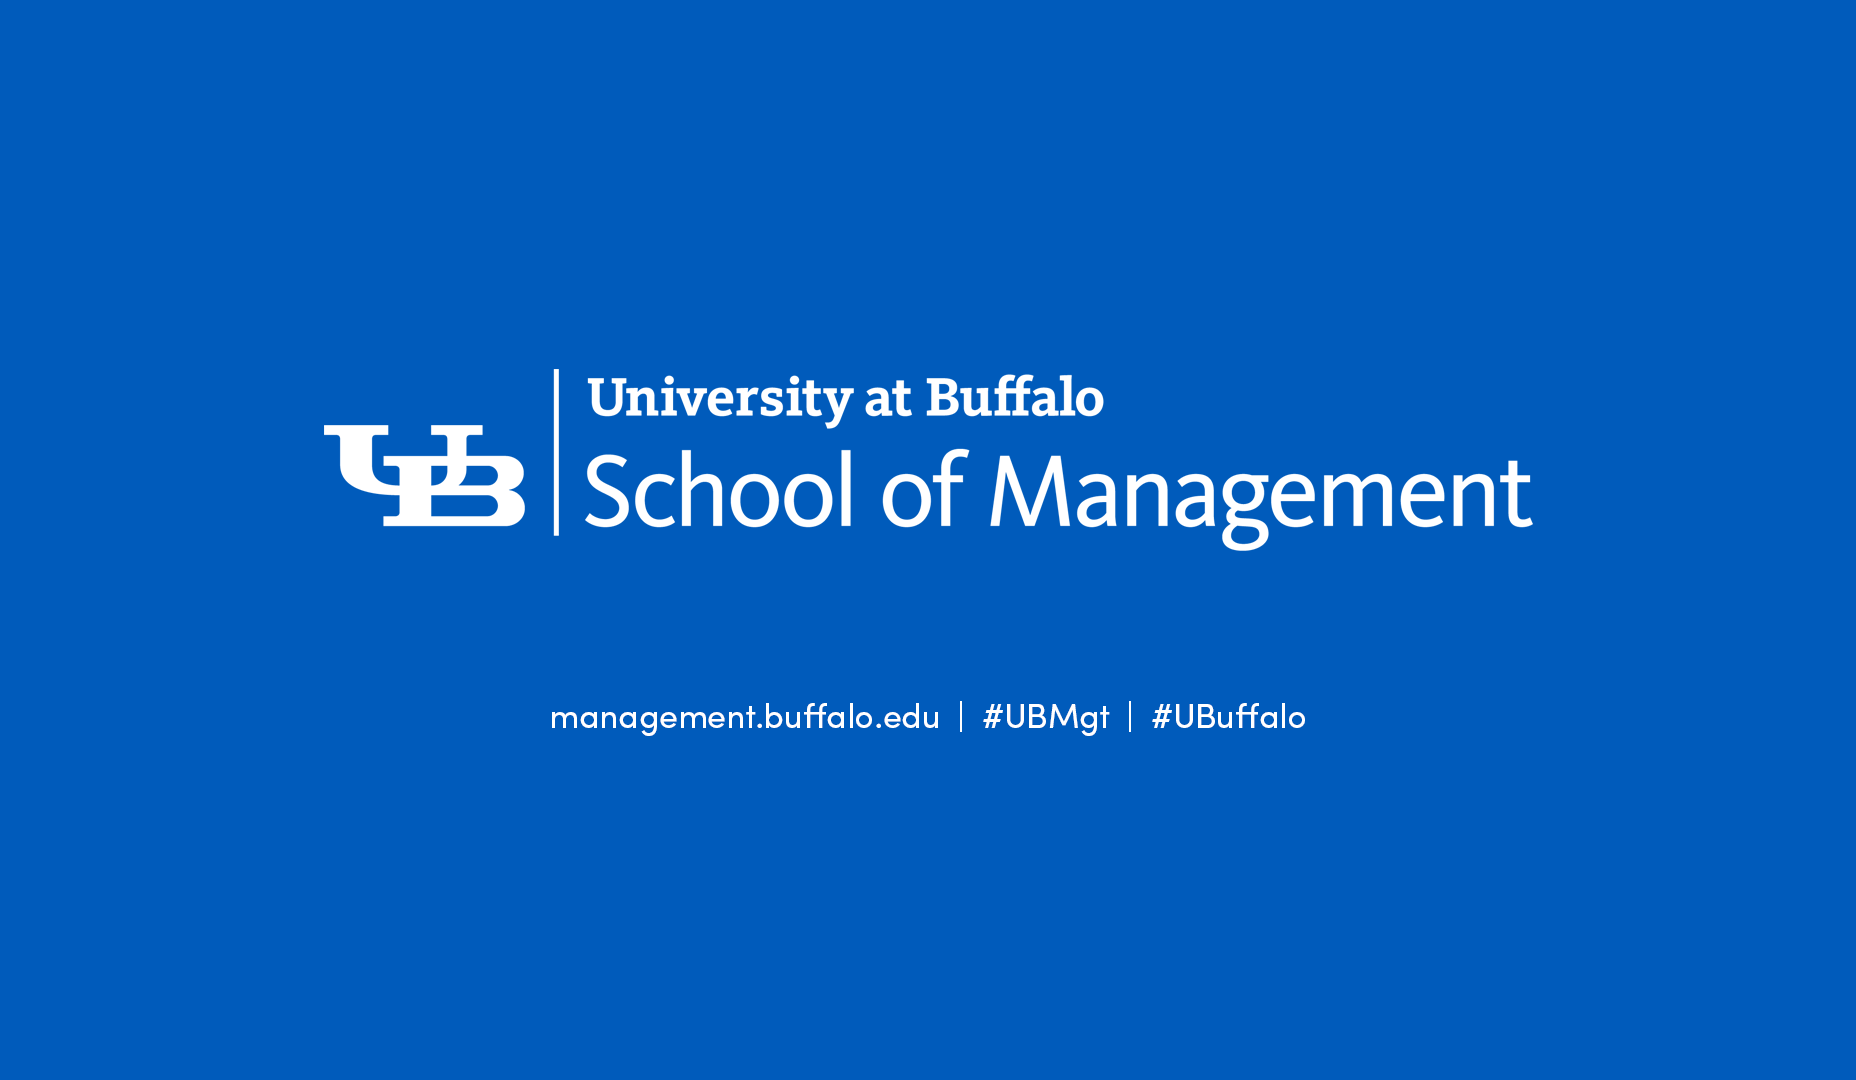 Zoom image: School of Management video closing screen